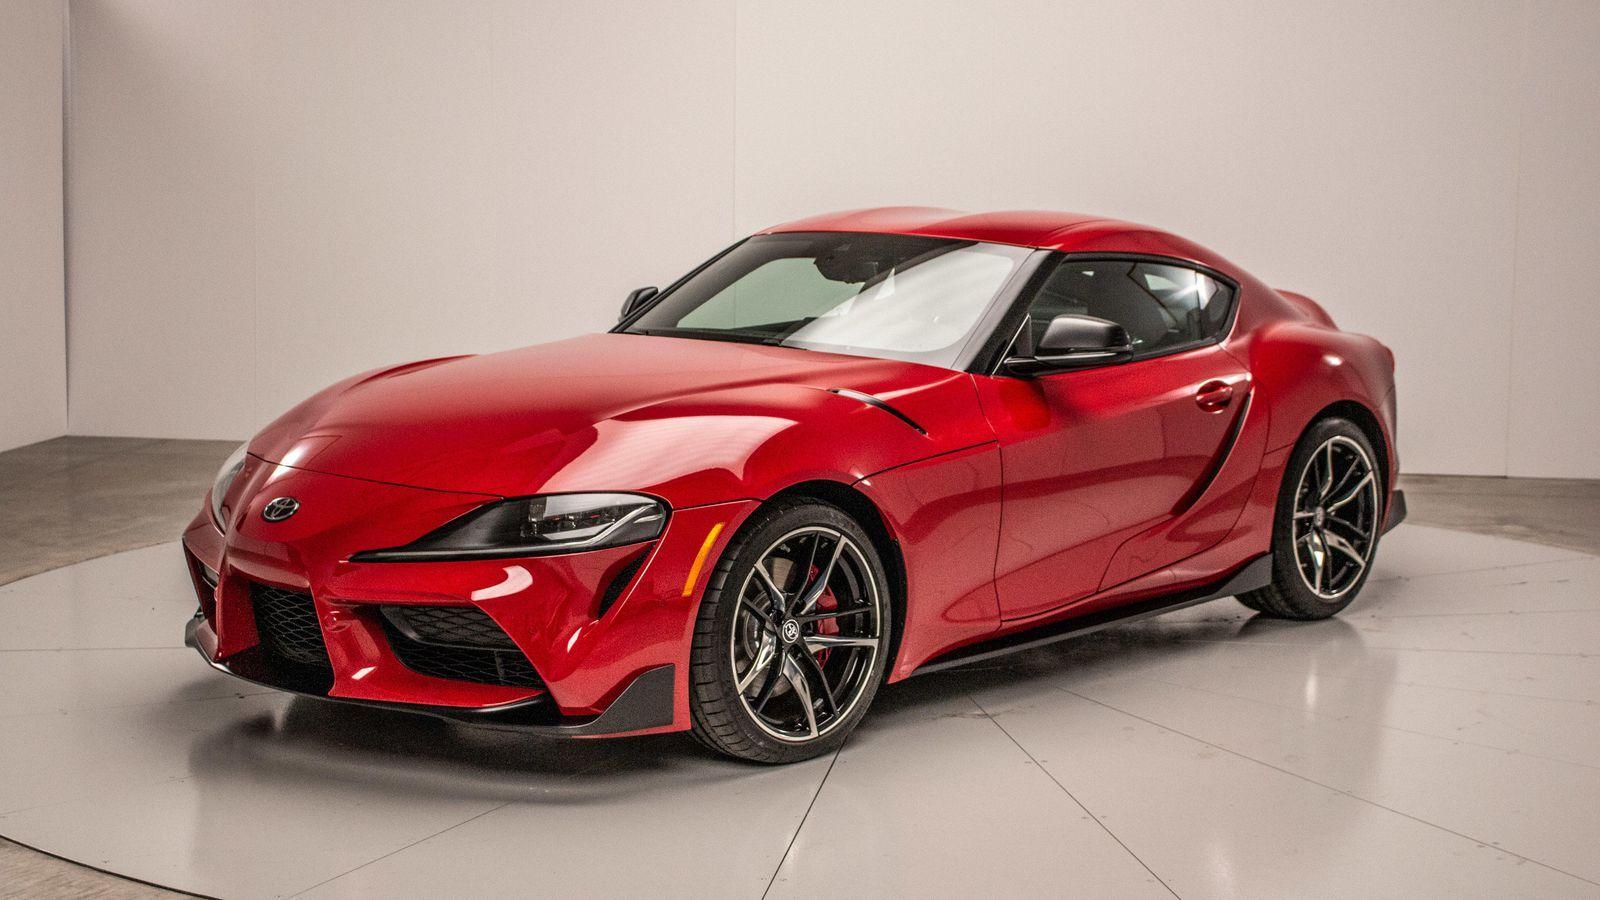 Toyota Supra officially revealed at Detroit Auto Show